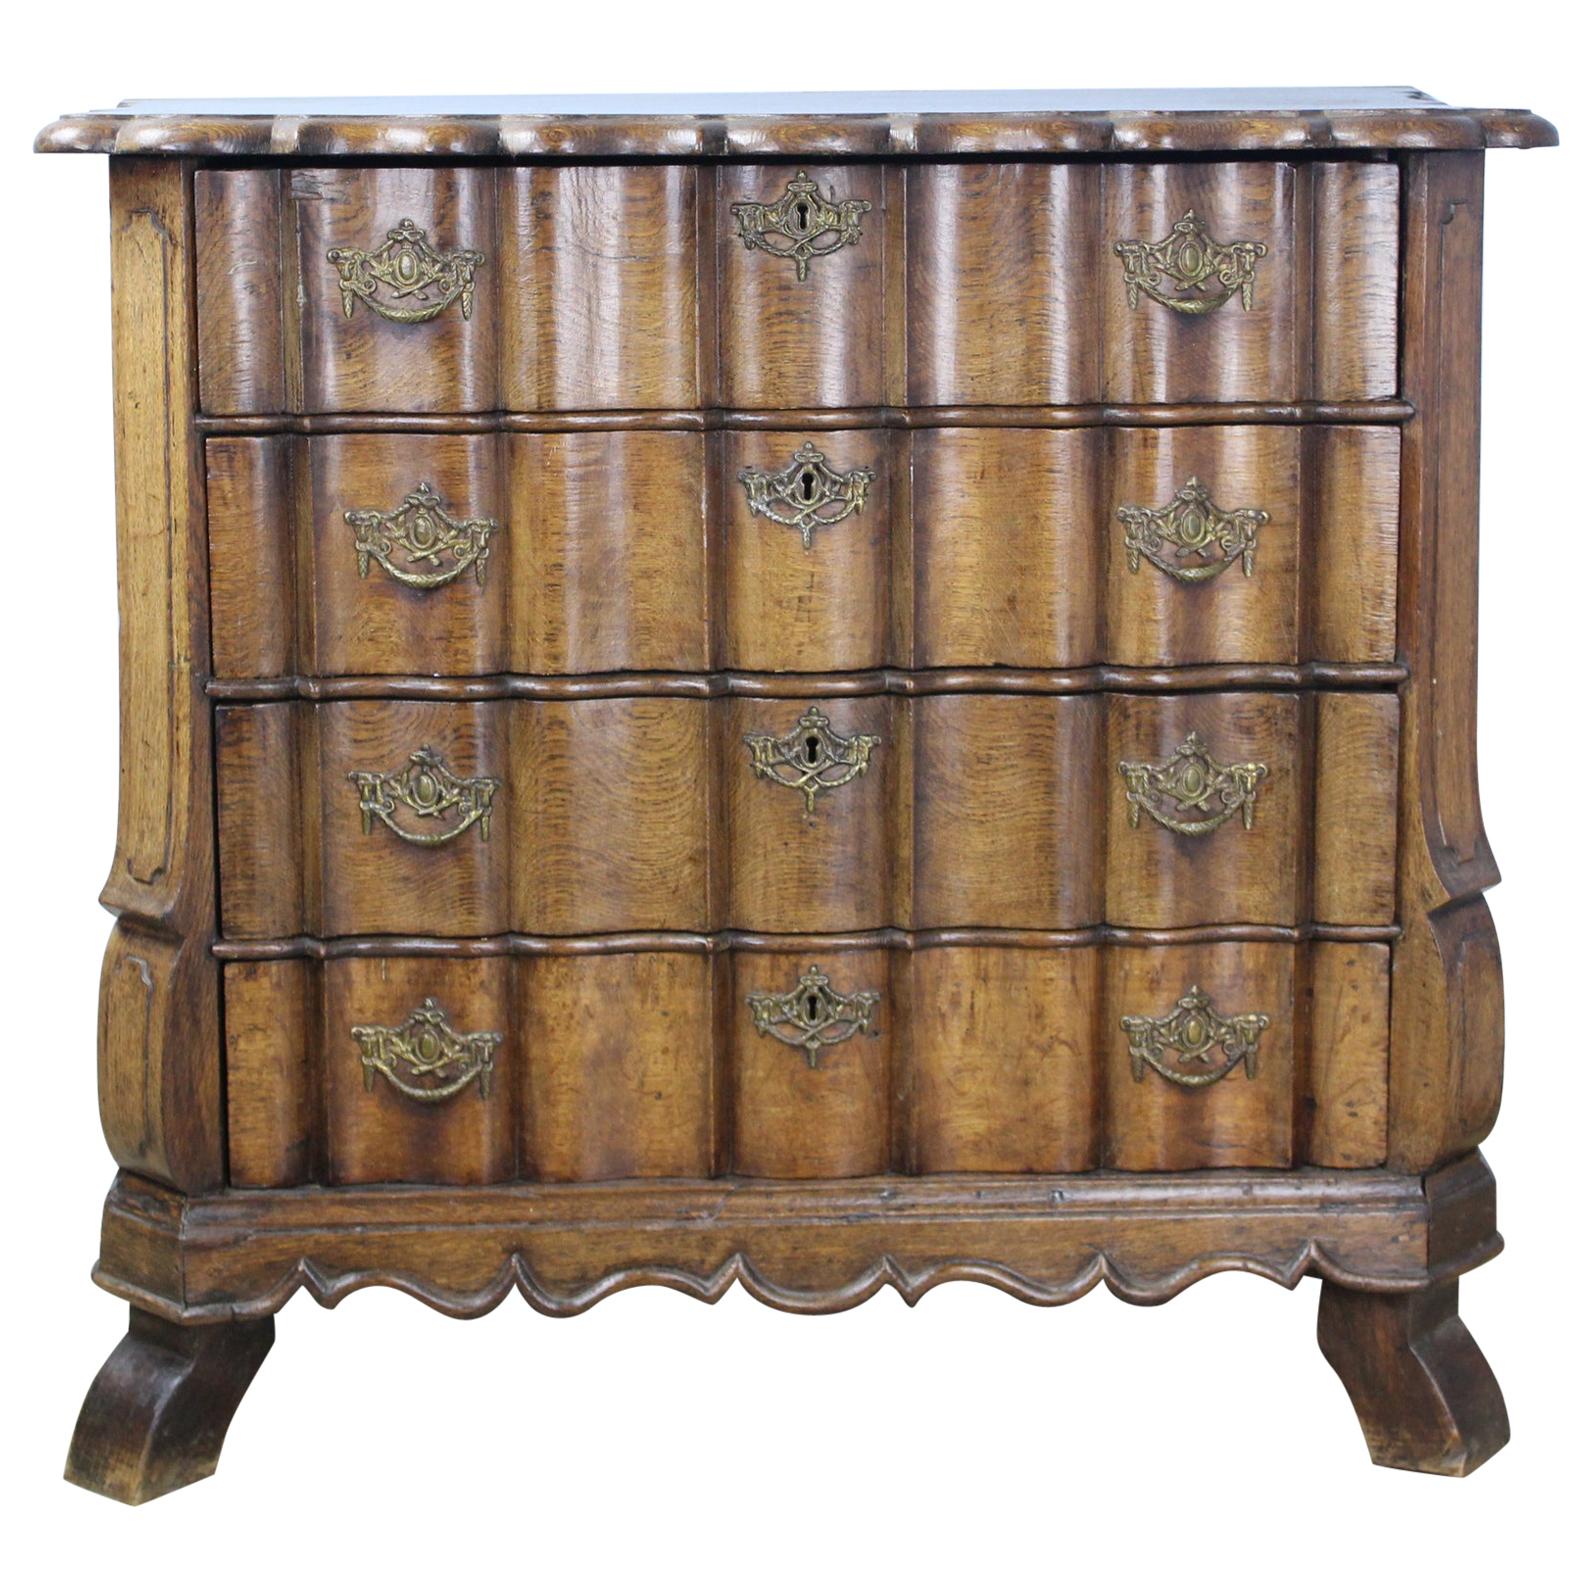 Period 18th Century Dutch Chest/Commode, Serpentine Drawers